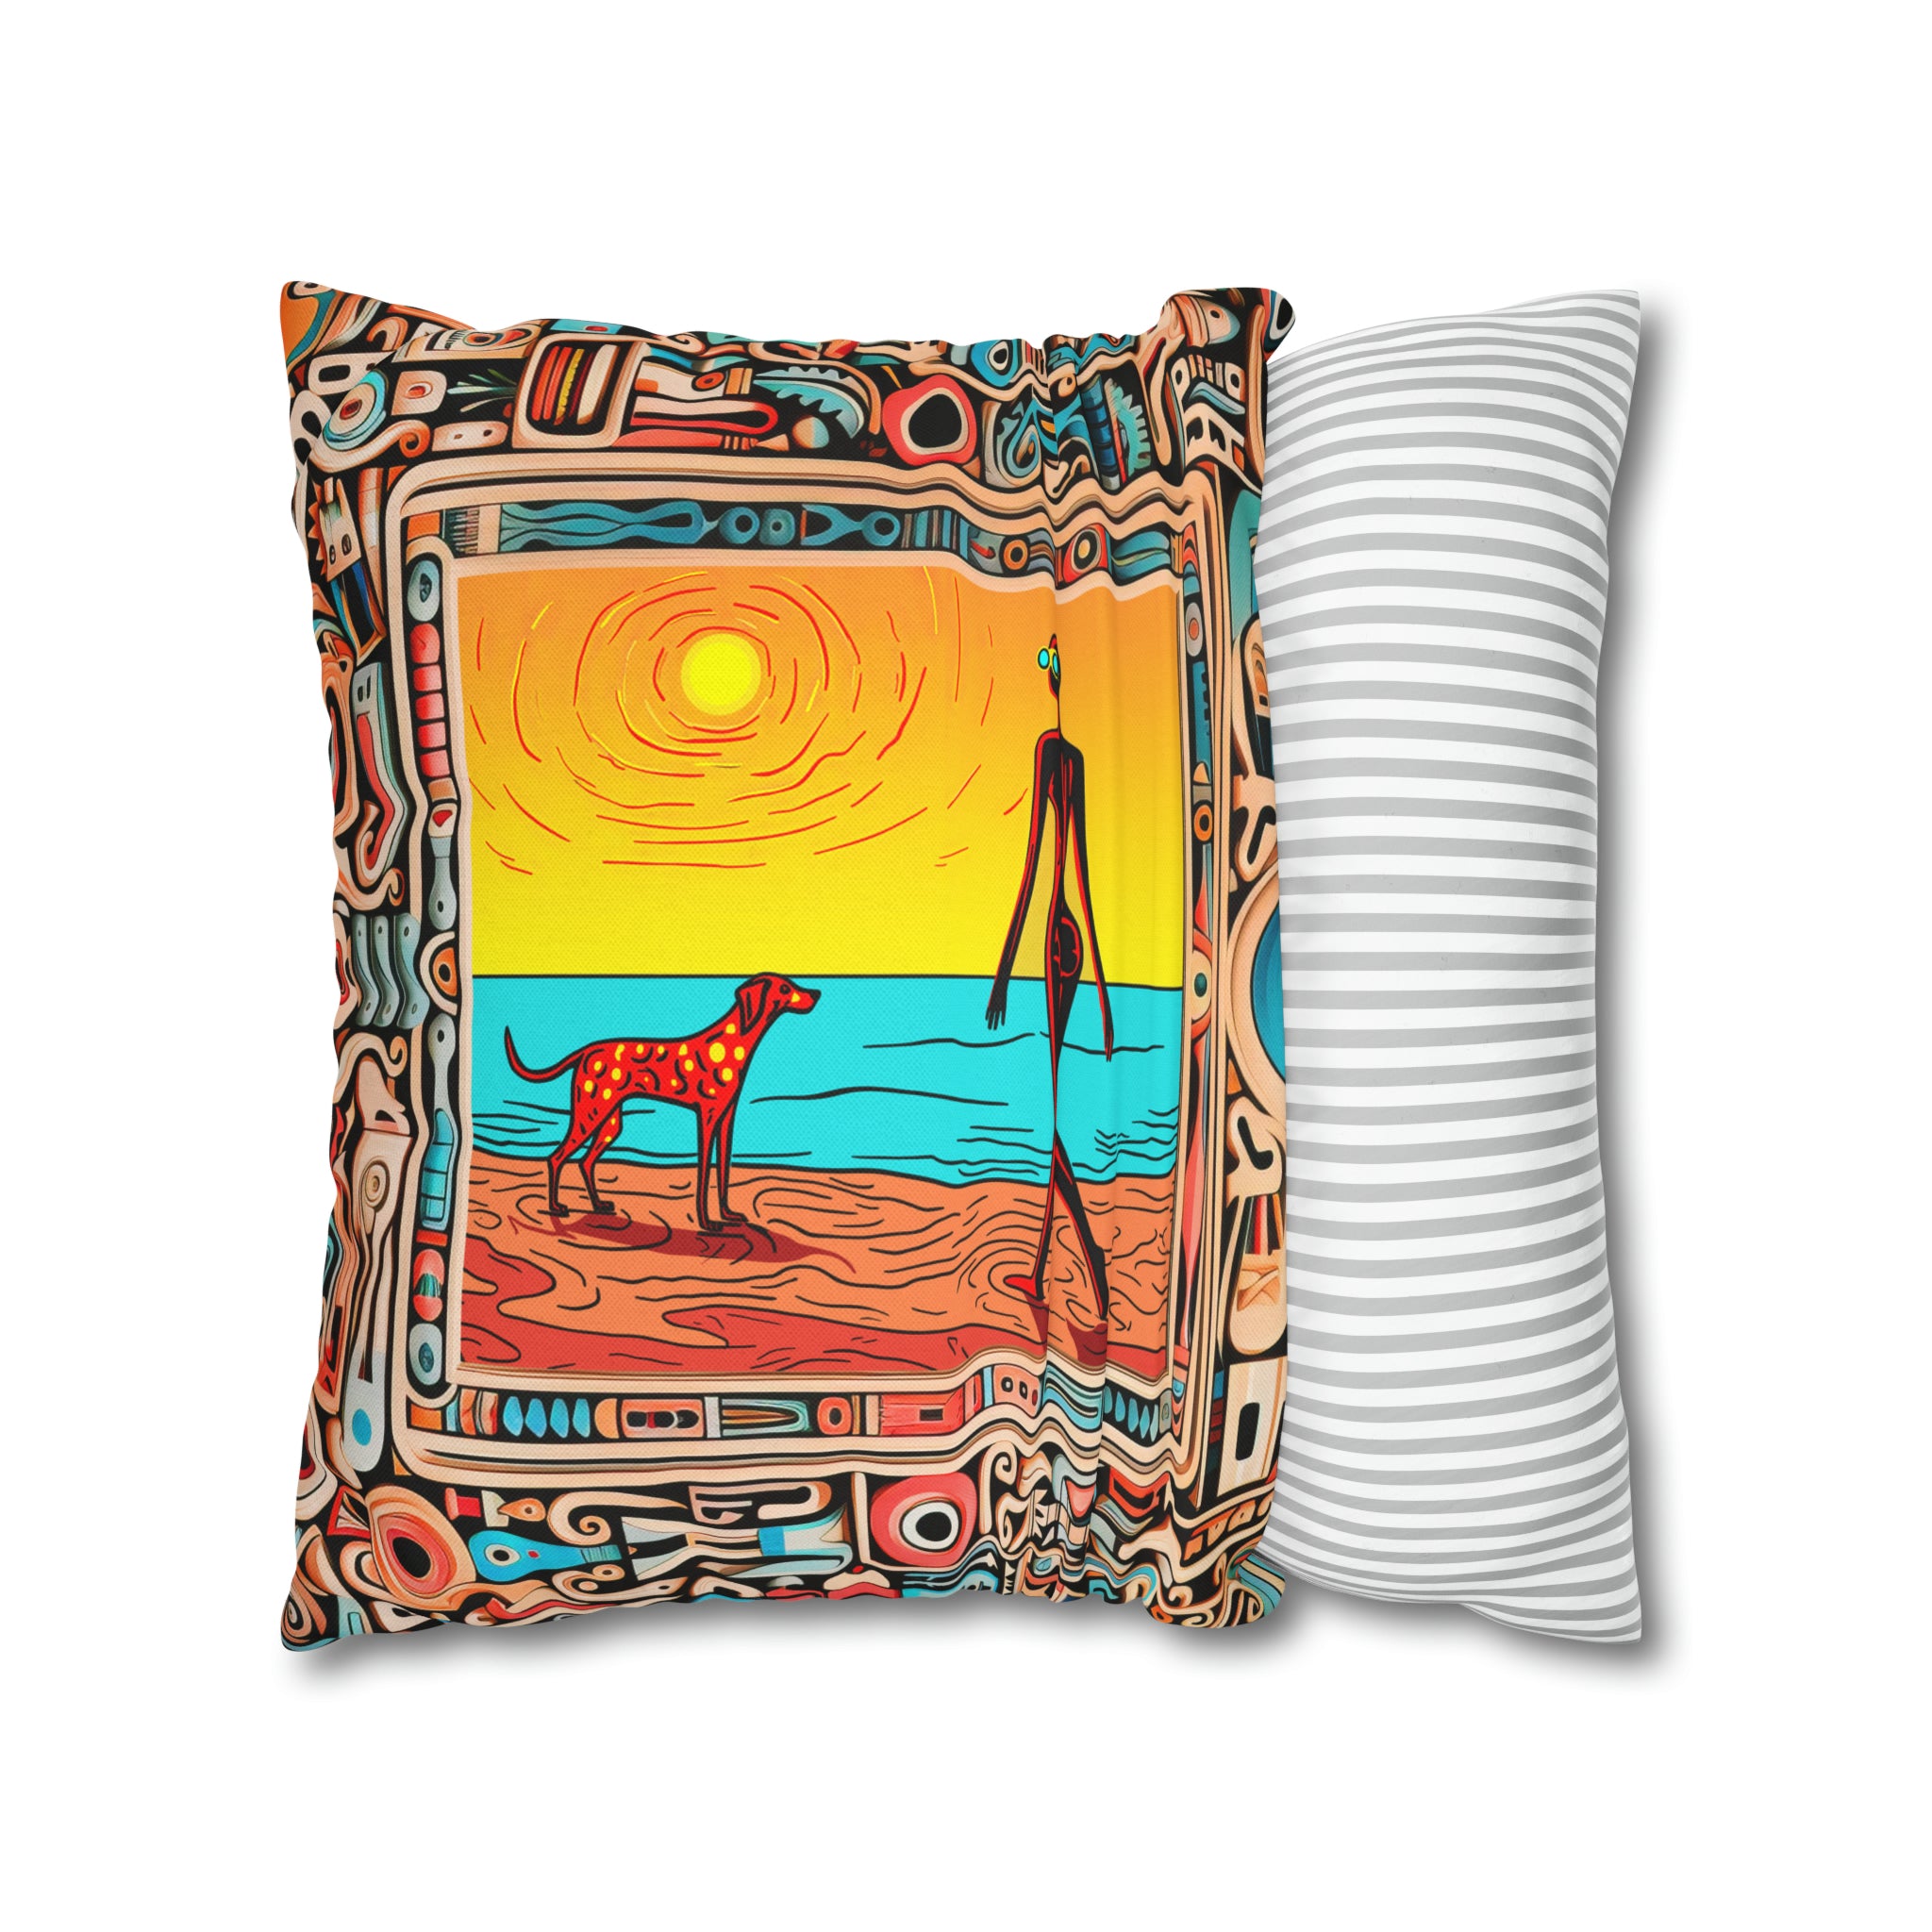 Square Pillow Case 18" x 18", CASE ONLY, no pillow form, original Pop Art Style, Alien & her Spotted Dog at the Beach, In a Frame